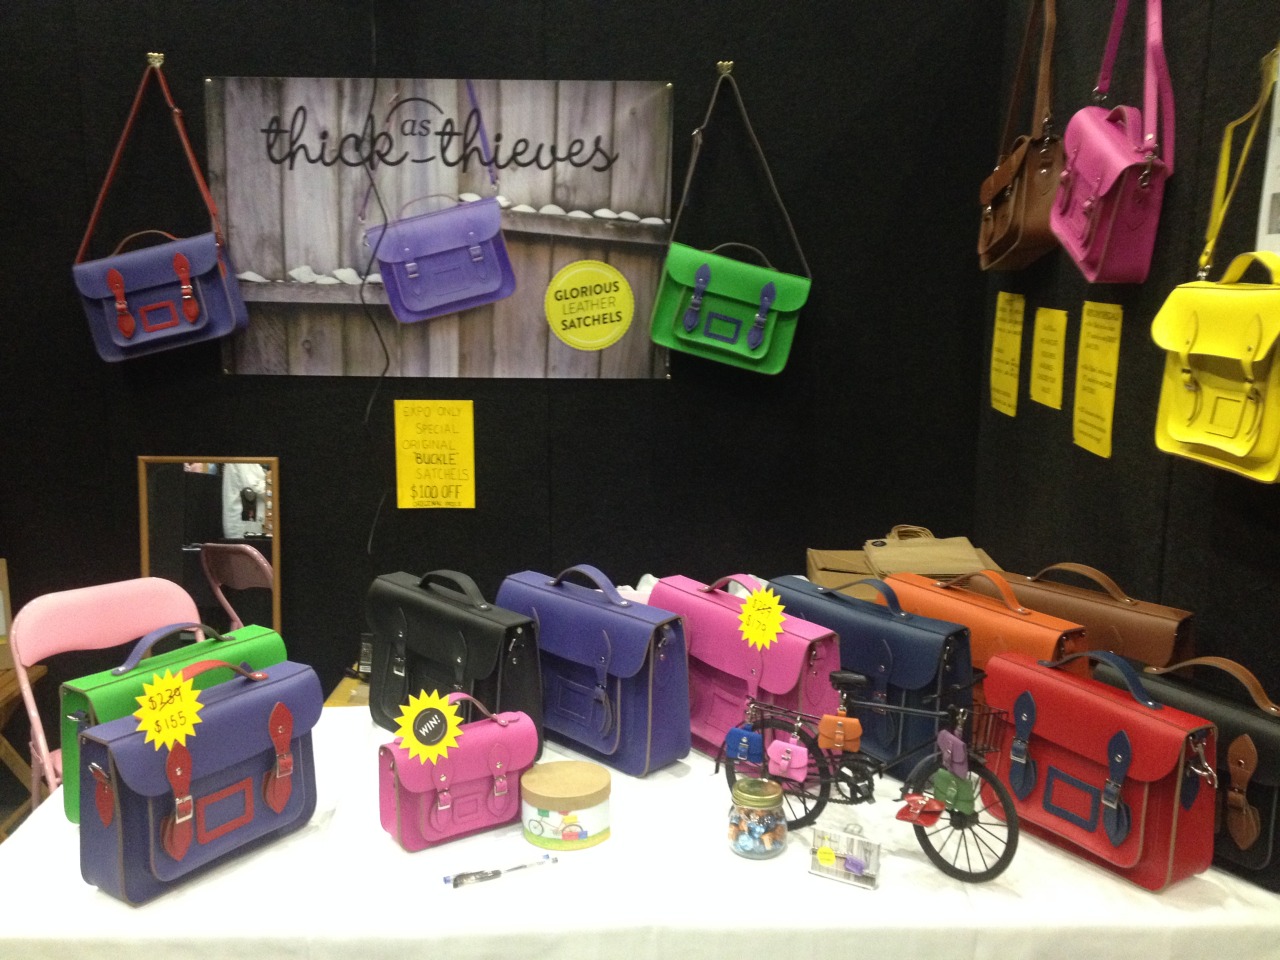 THANK YOU ROTORUA FOR A WONDERFUL WEEKEND!
It was great to see everyone at the Rotorua Women’s Expo last weekend.
Thank you for your hospitality.
It was lovely to hear your stories of the relationships with your old school satchels!